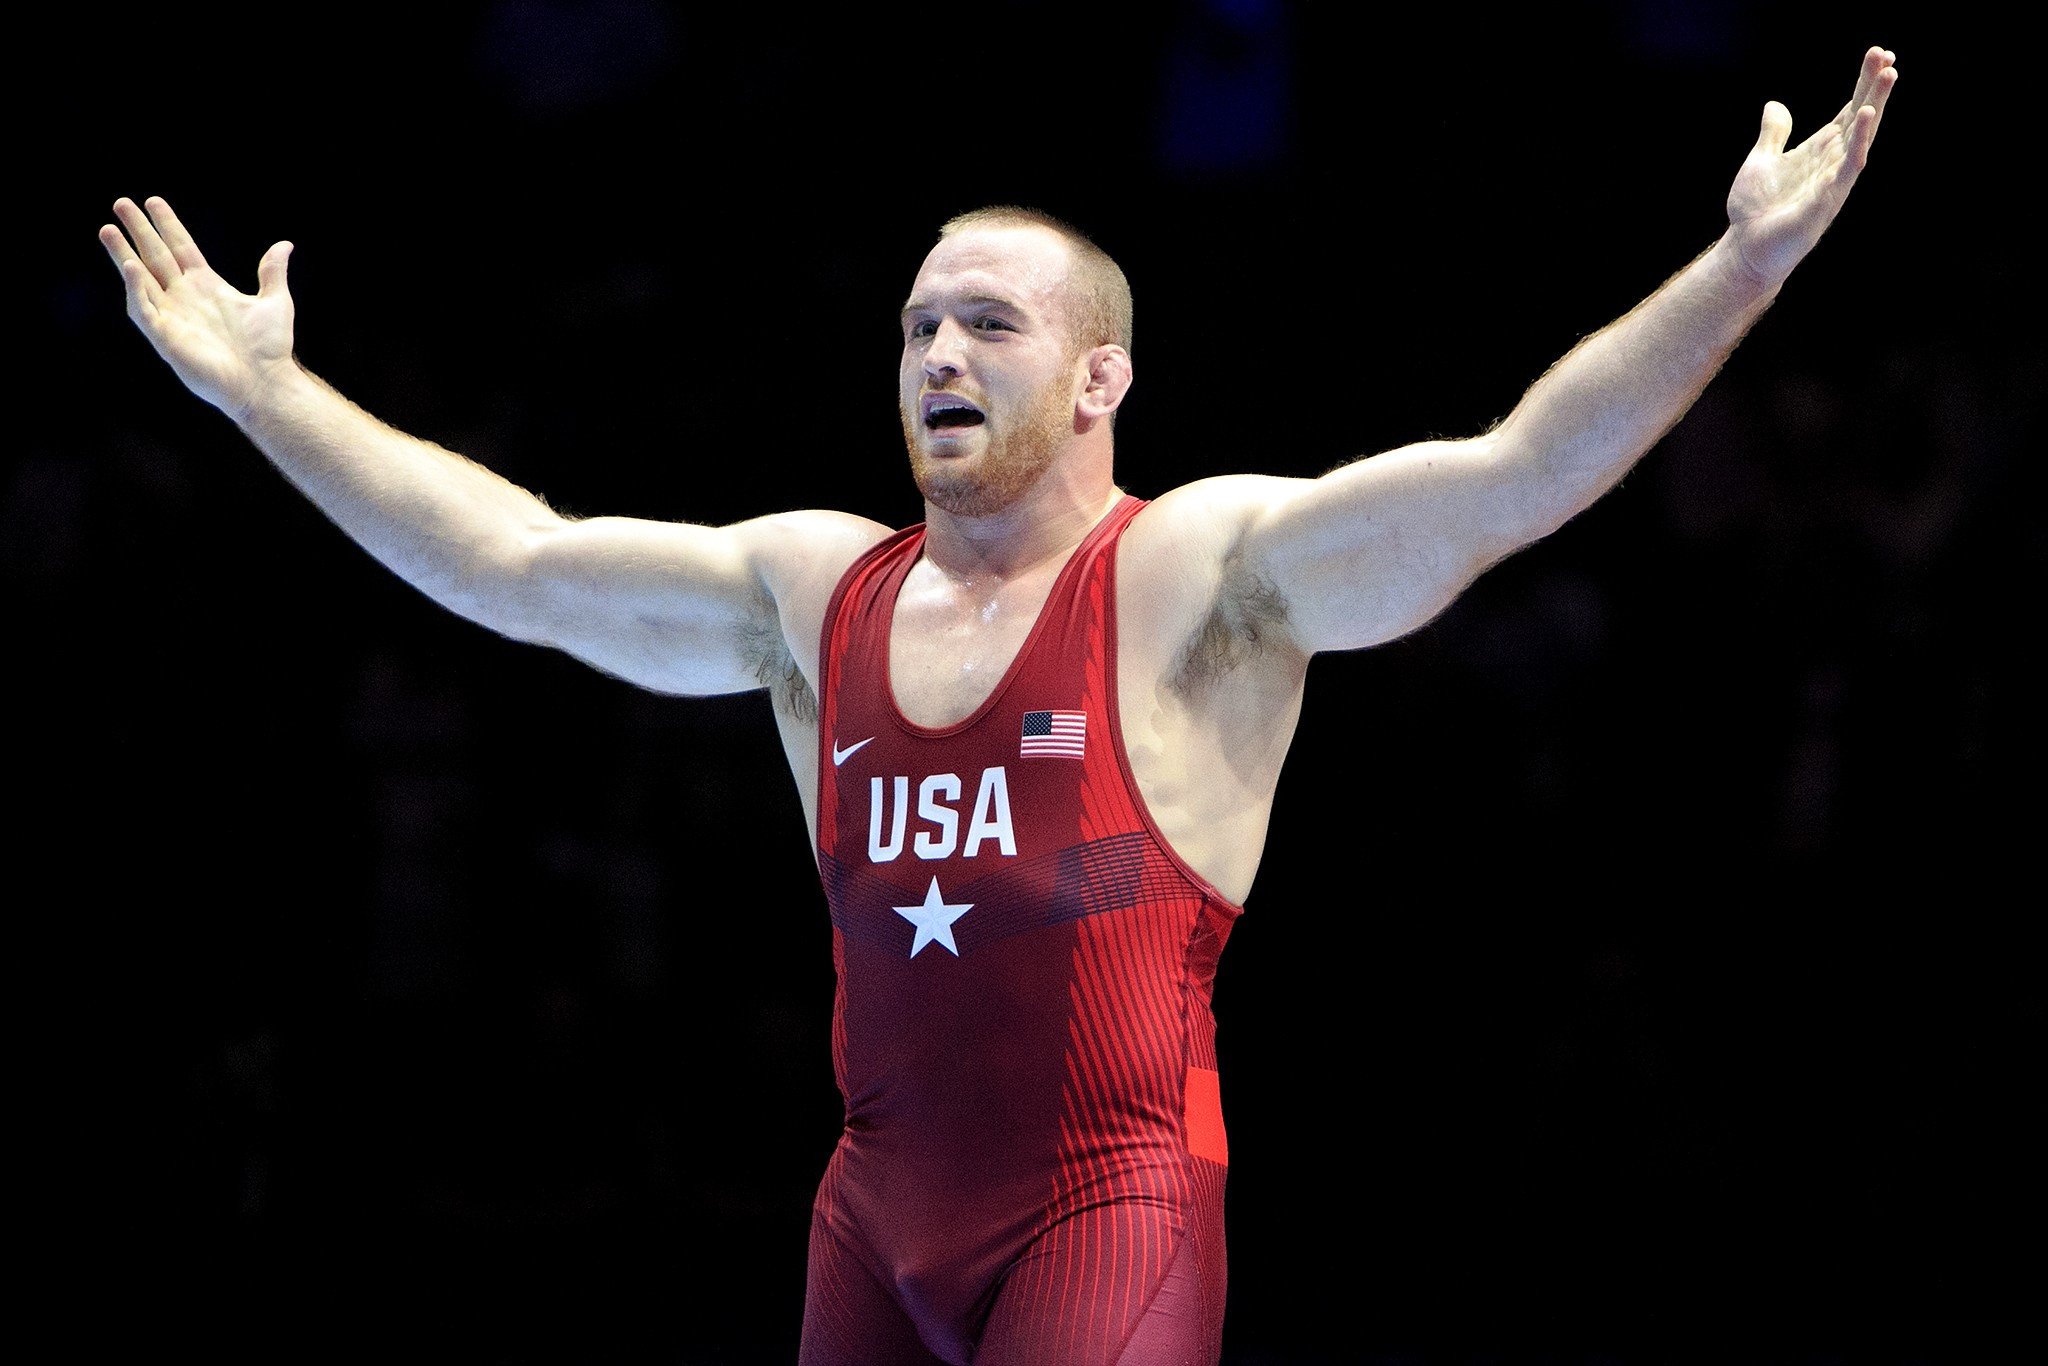 Kyle Snyder secured his second world title on the final day of competition ©UWW